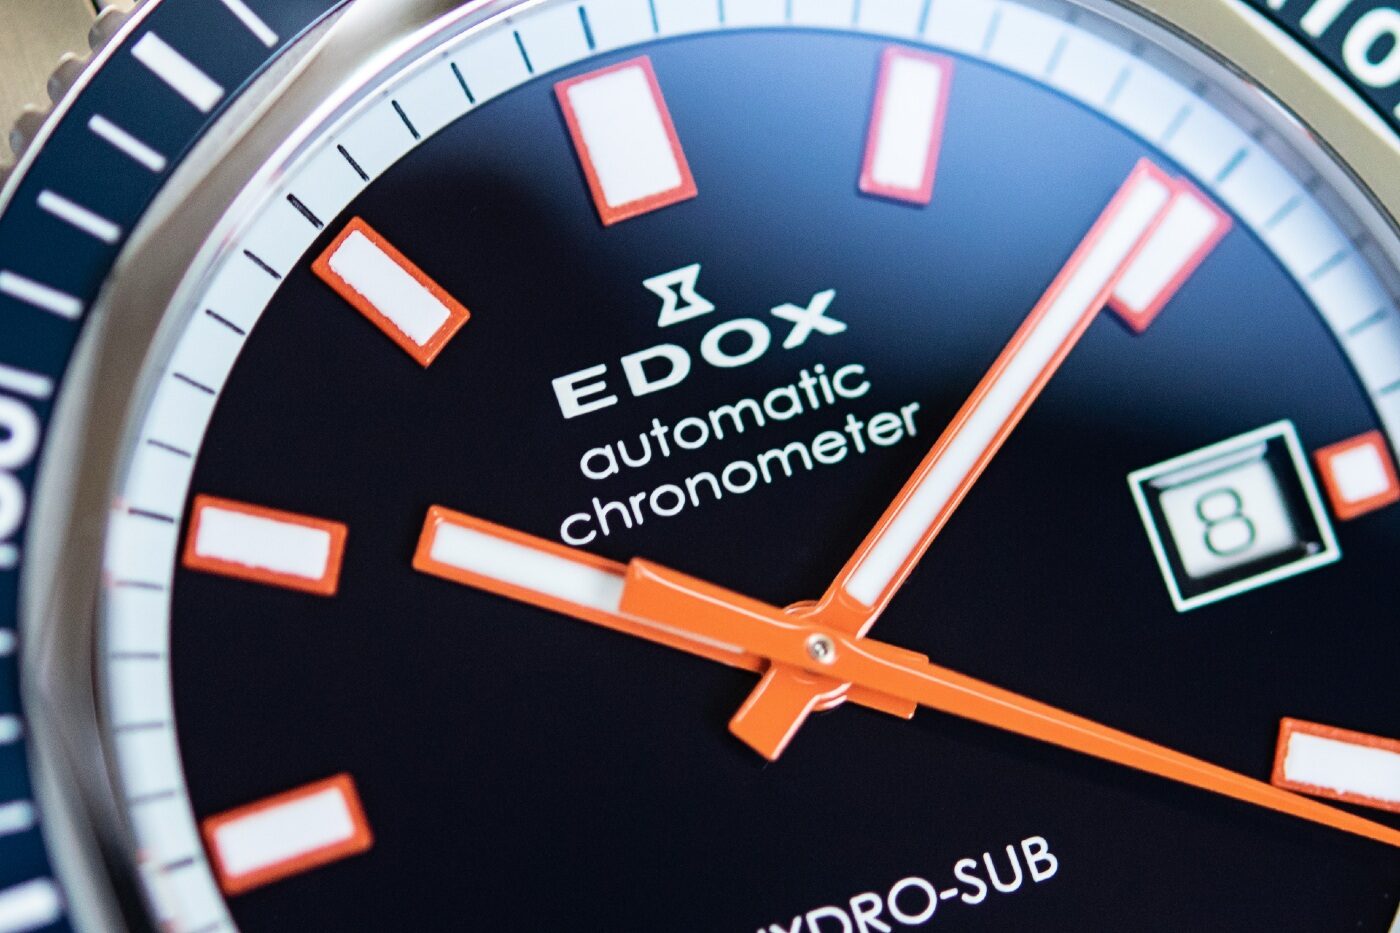 The Hydro-Sub Automatic Chronometer Limited Edition